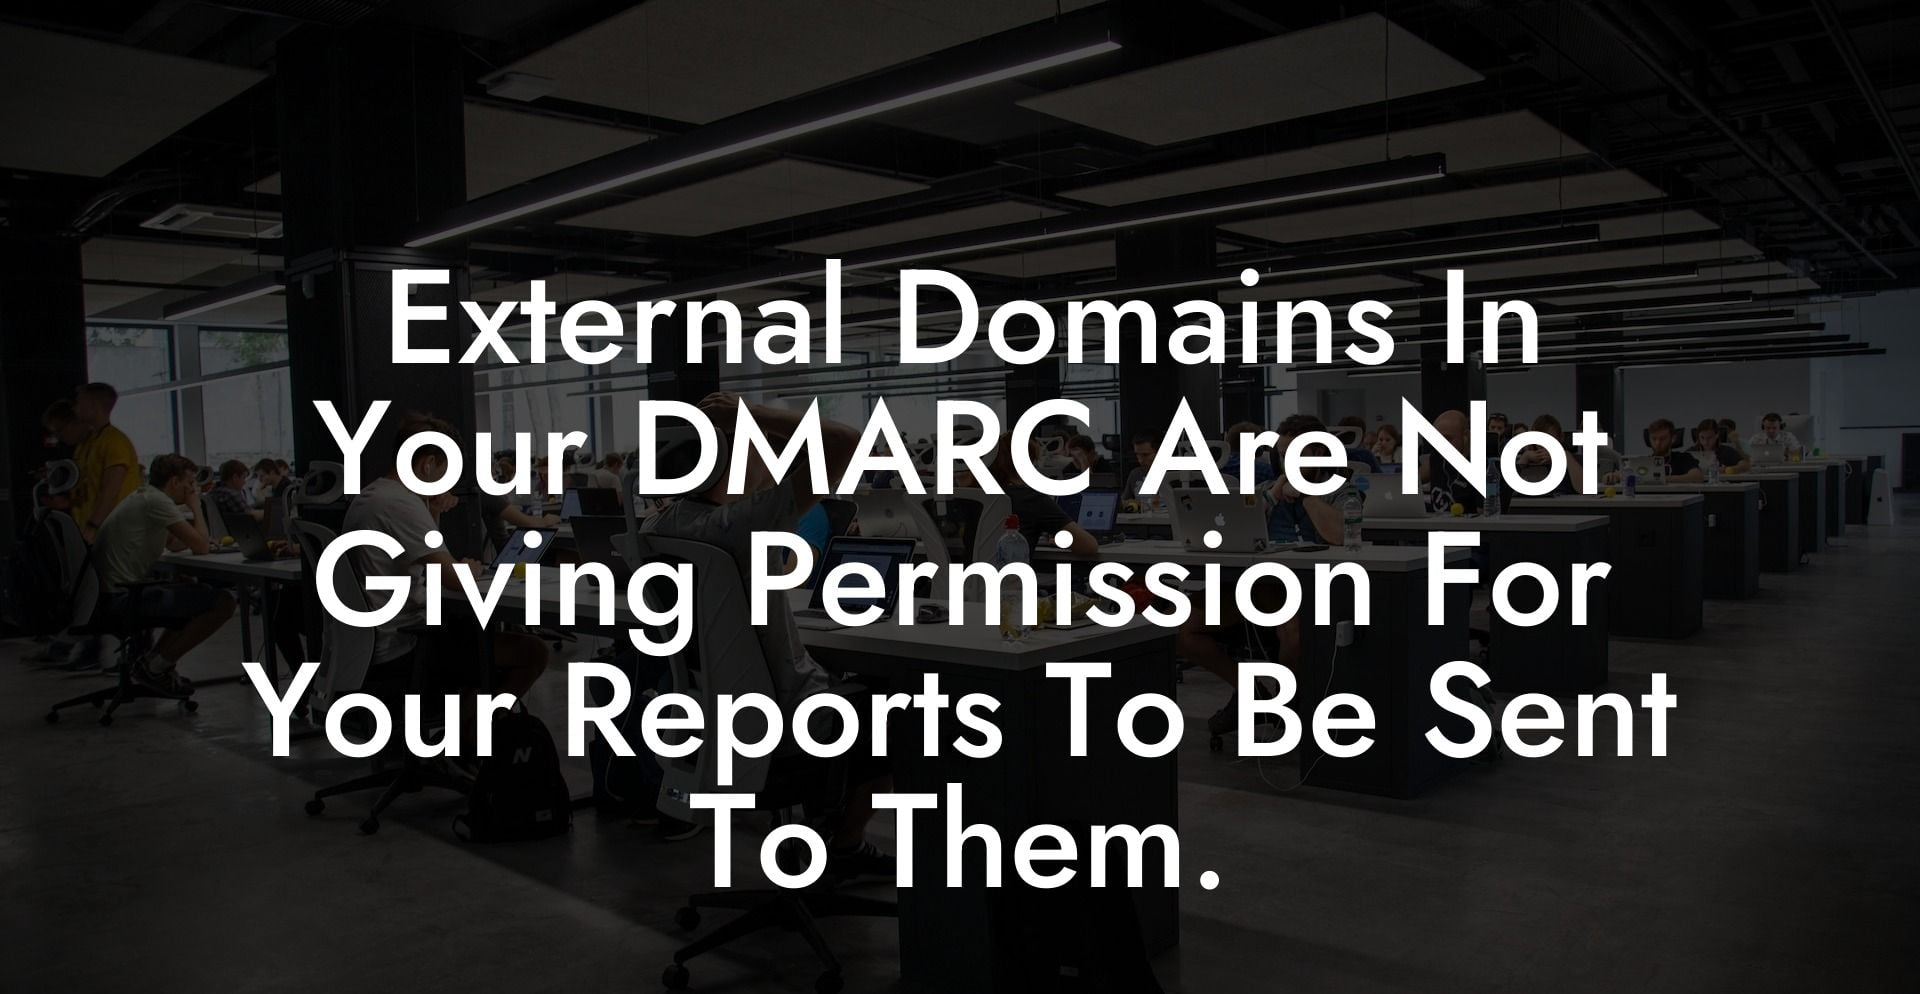 External Domains In Your DMARC Are Not Giving Permission For Your Reports To Be Sent To Them.